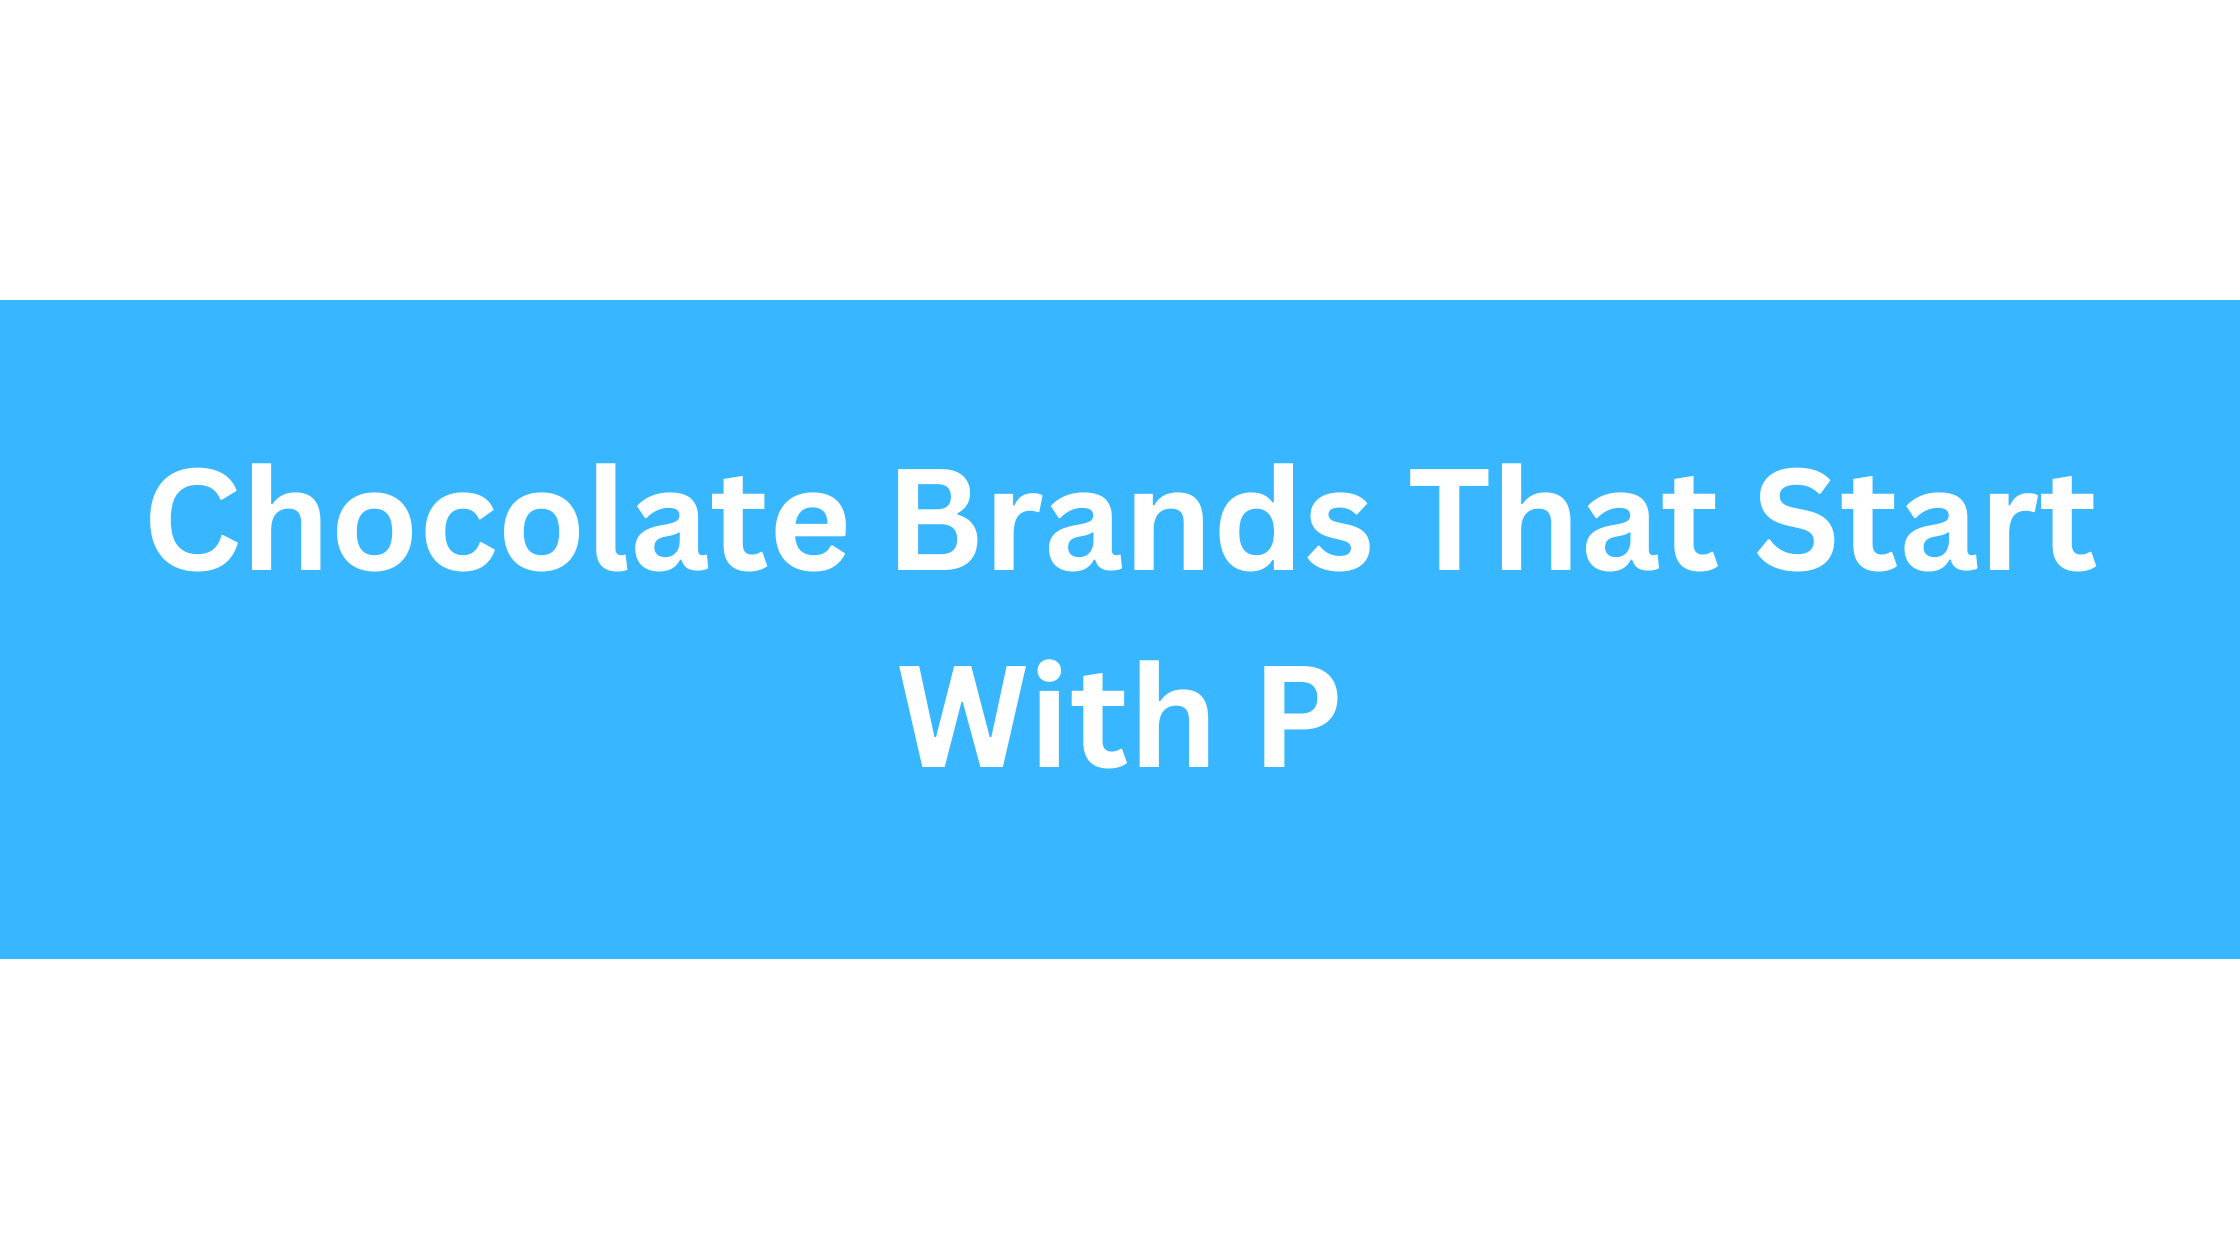 Chocolate Brands That Start With P